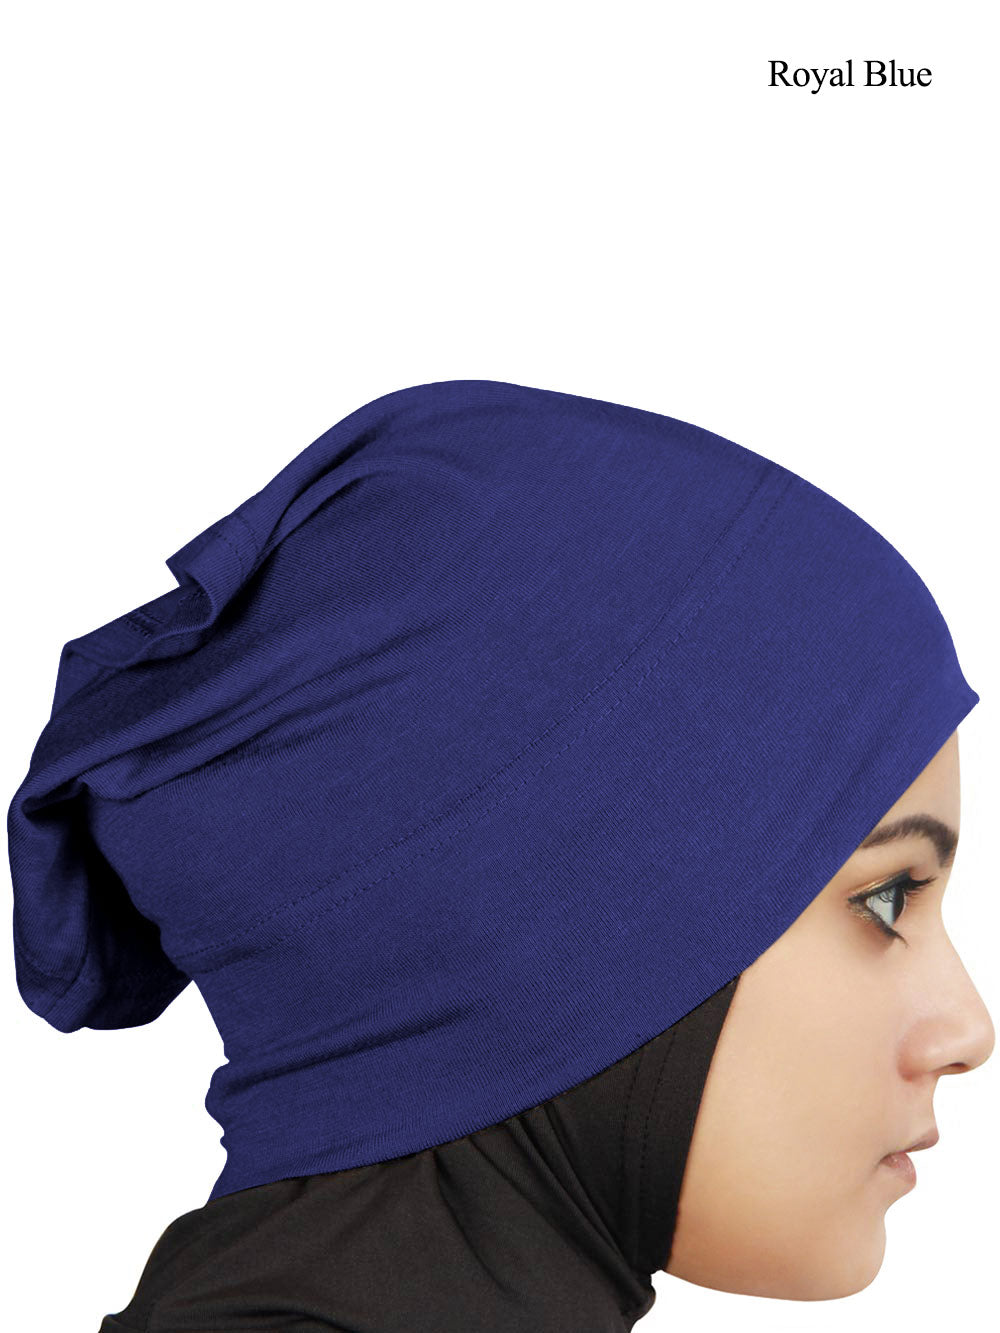 Two Piece Instant Royal Blue Viscose Jersey Hijab